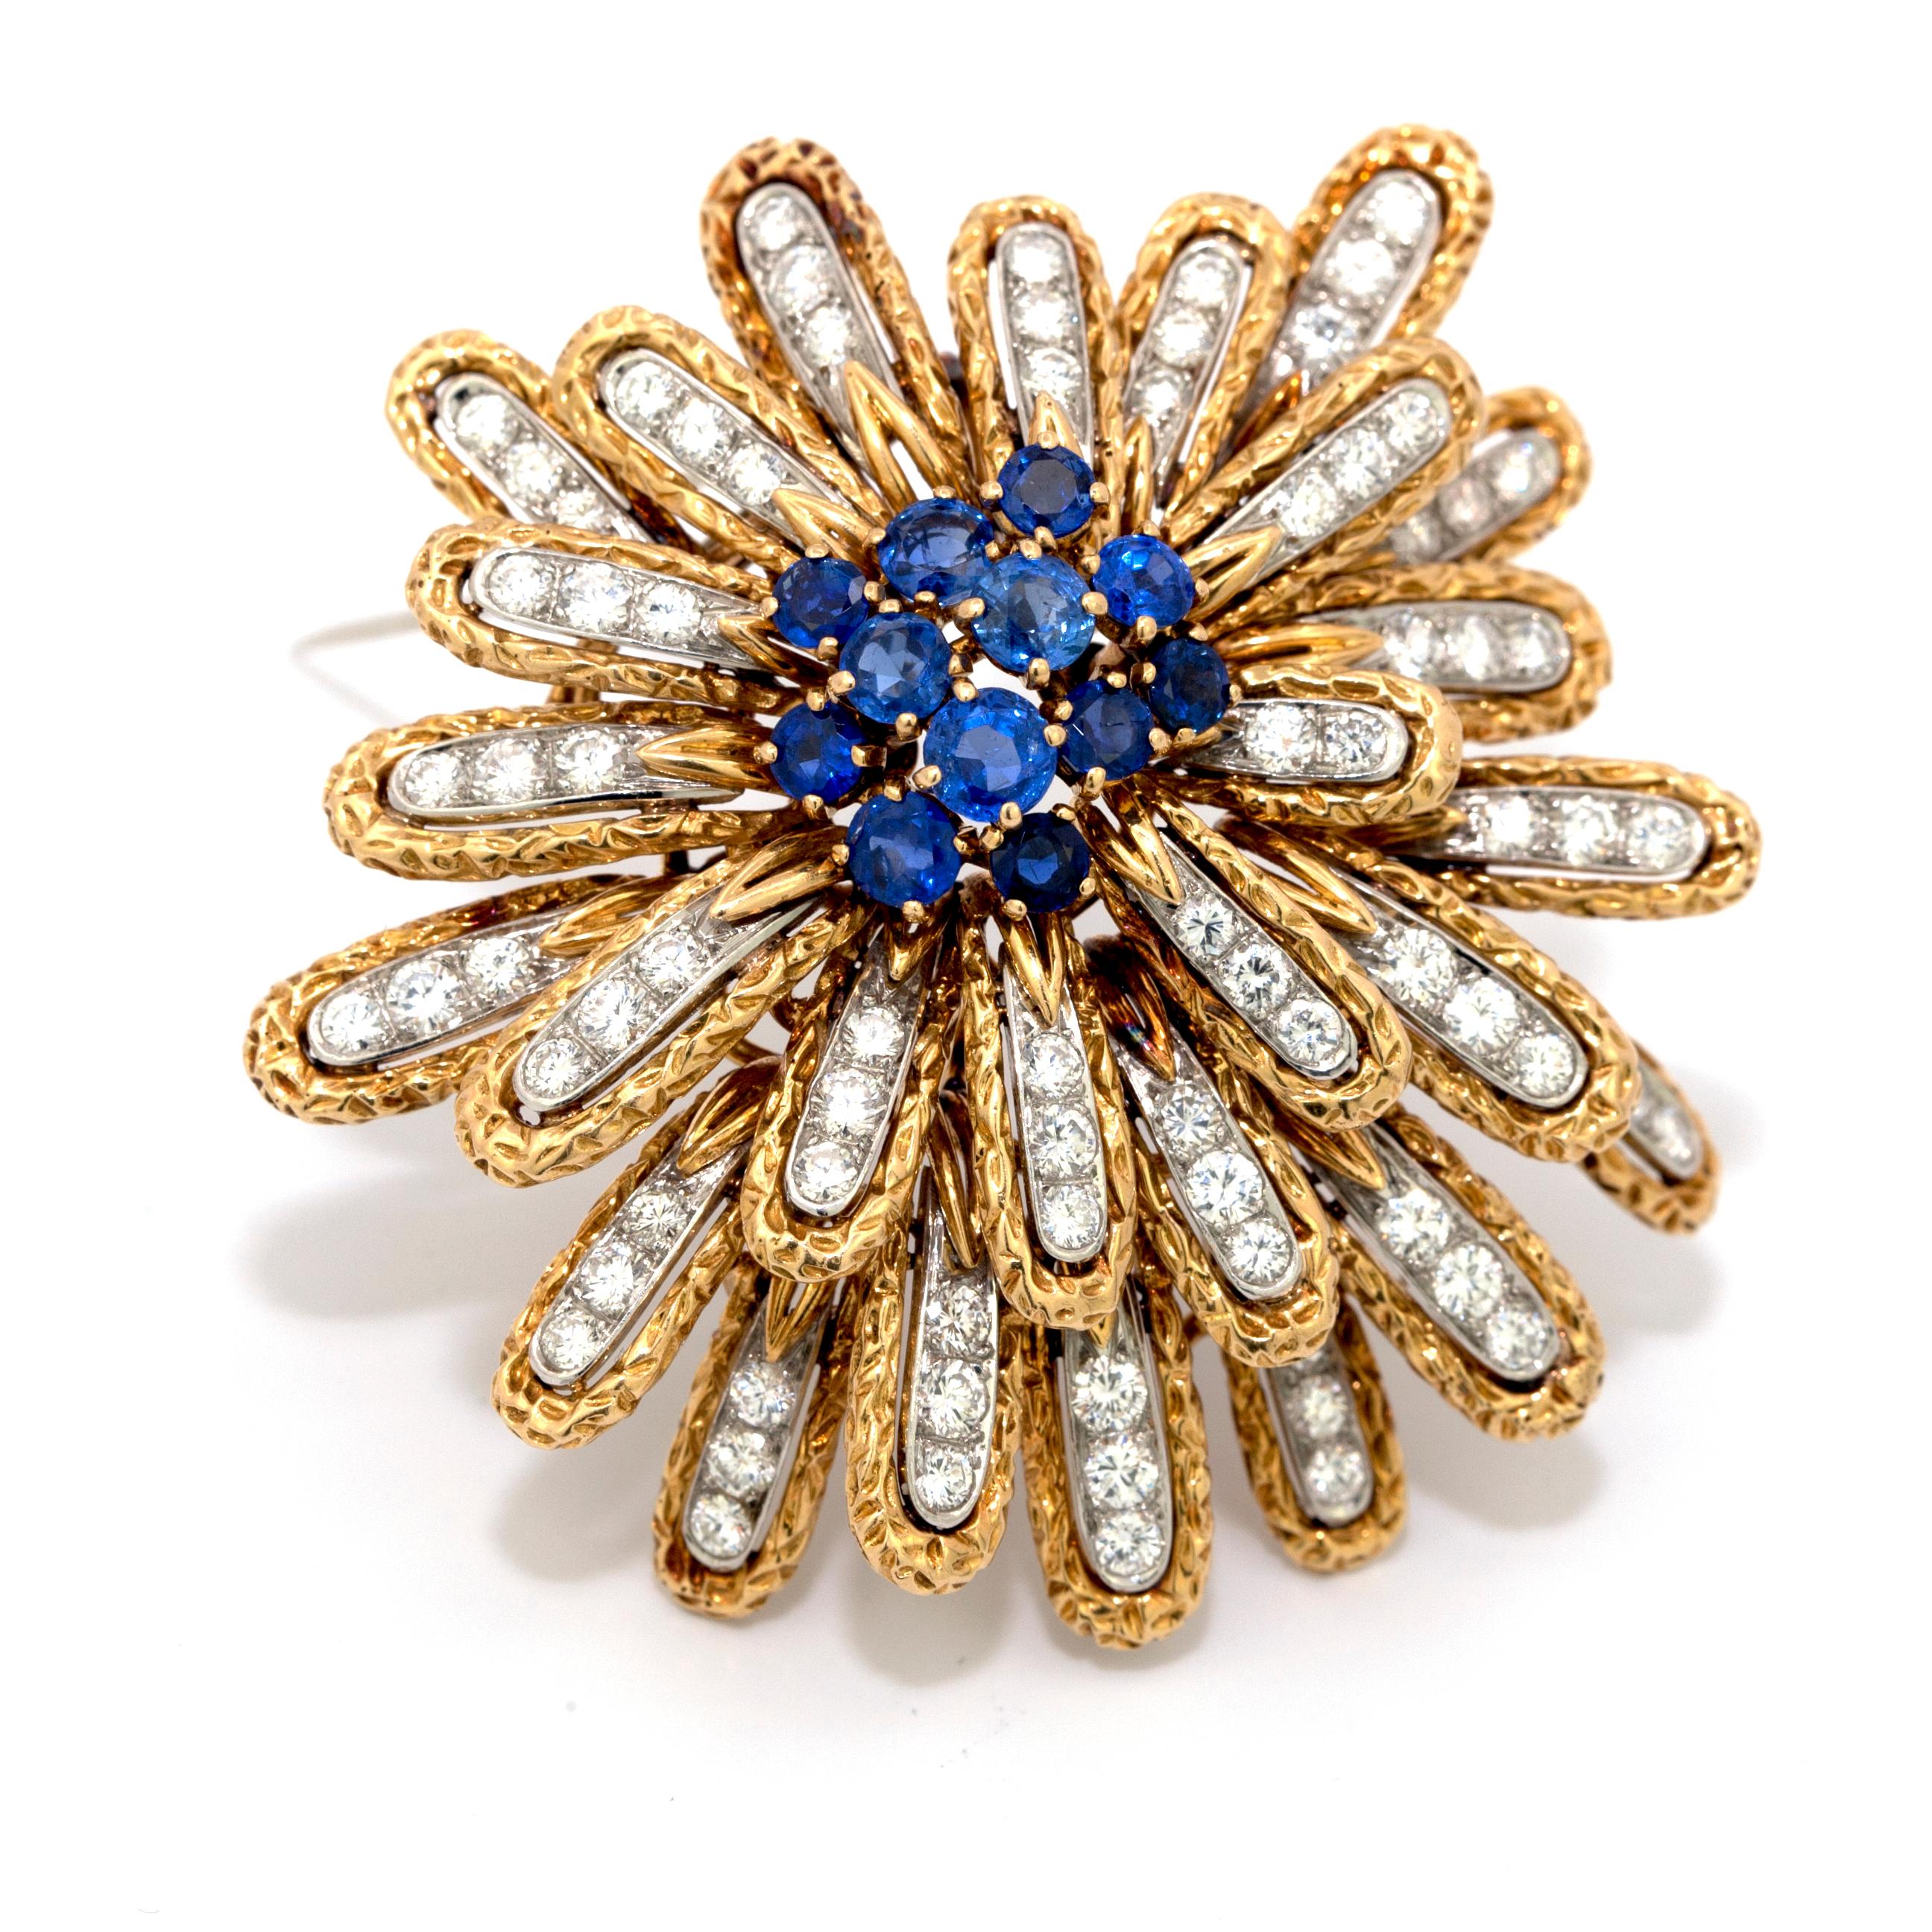 Round Cut Van Cleef & Arpels Diamond and Sapphire Brooch / Pin For Sale